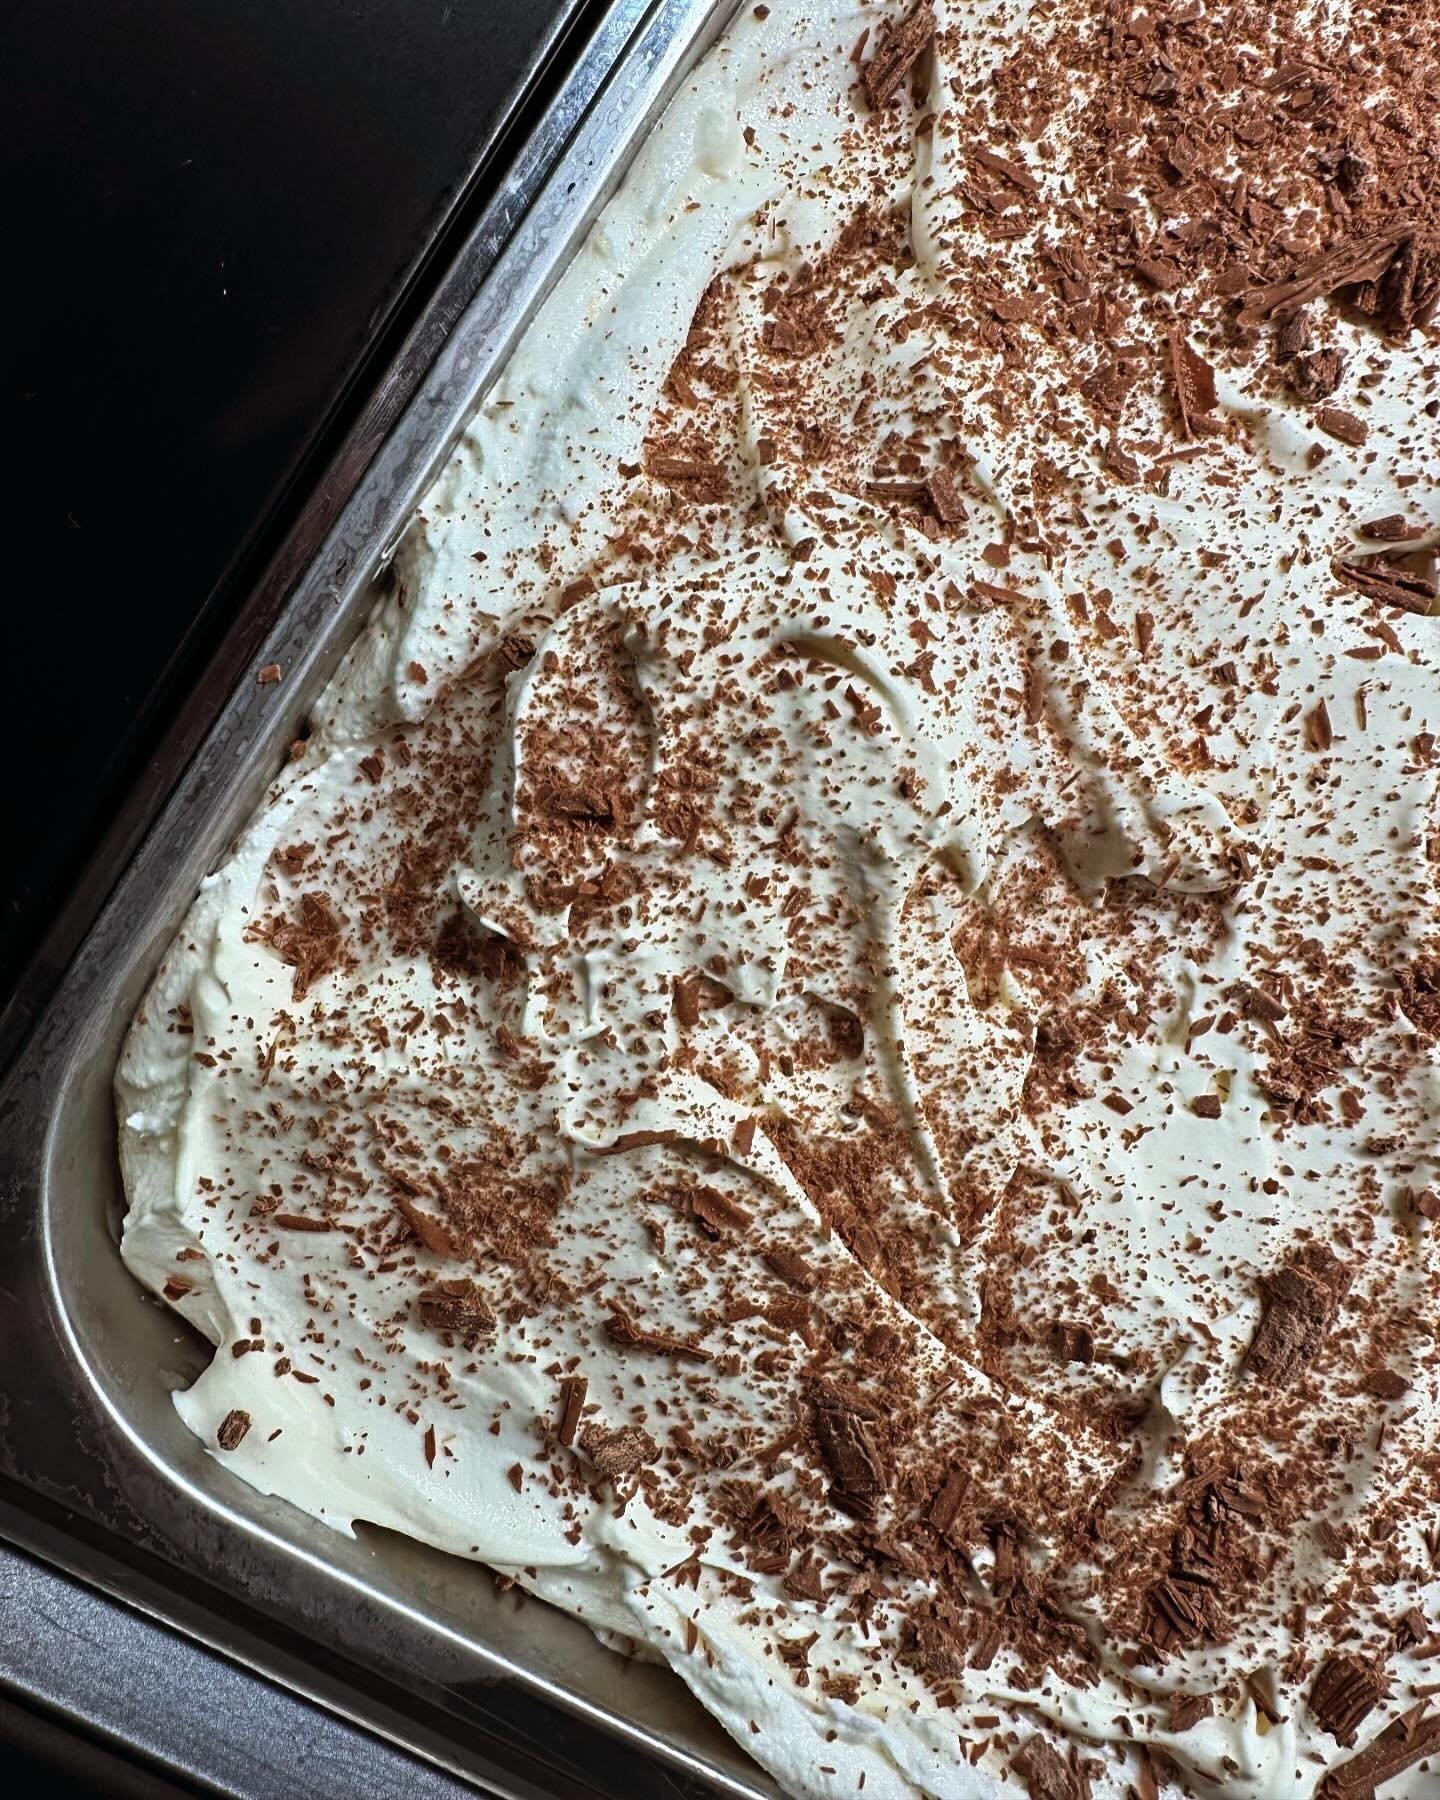 There&rsquo;s a few things to look forward to this Sunday - this is definitely one of them 🍌 

Banana Pudding - A fresh banana gelato with a vanilla semmifreddo rippled though, decorated with crushed flake. 

It&rsquo;s the perfect TAKE HOME TUB gel